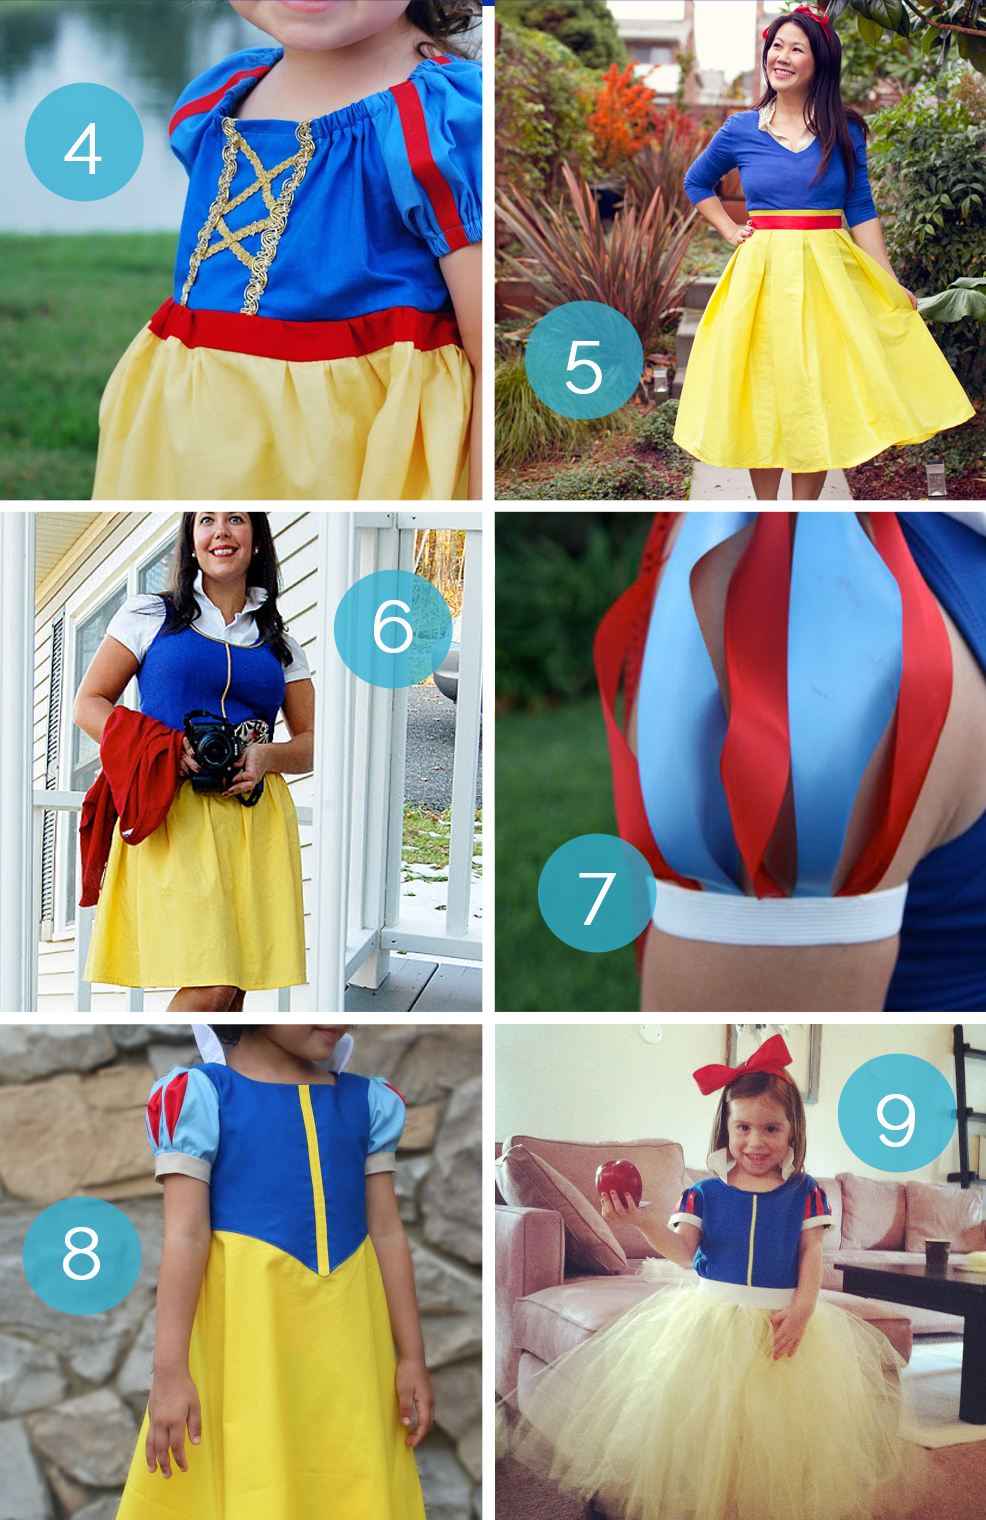 How to make a DIY Snow White costume - all the best tutorials for how to make a homemade Snow White costume.